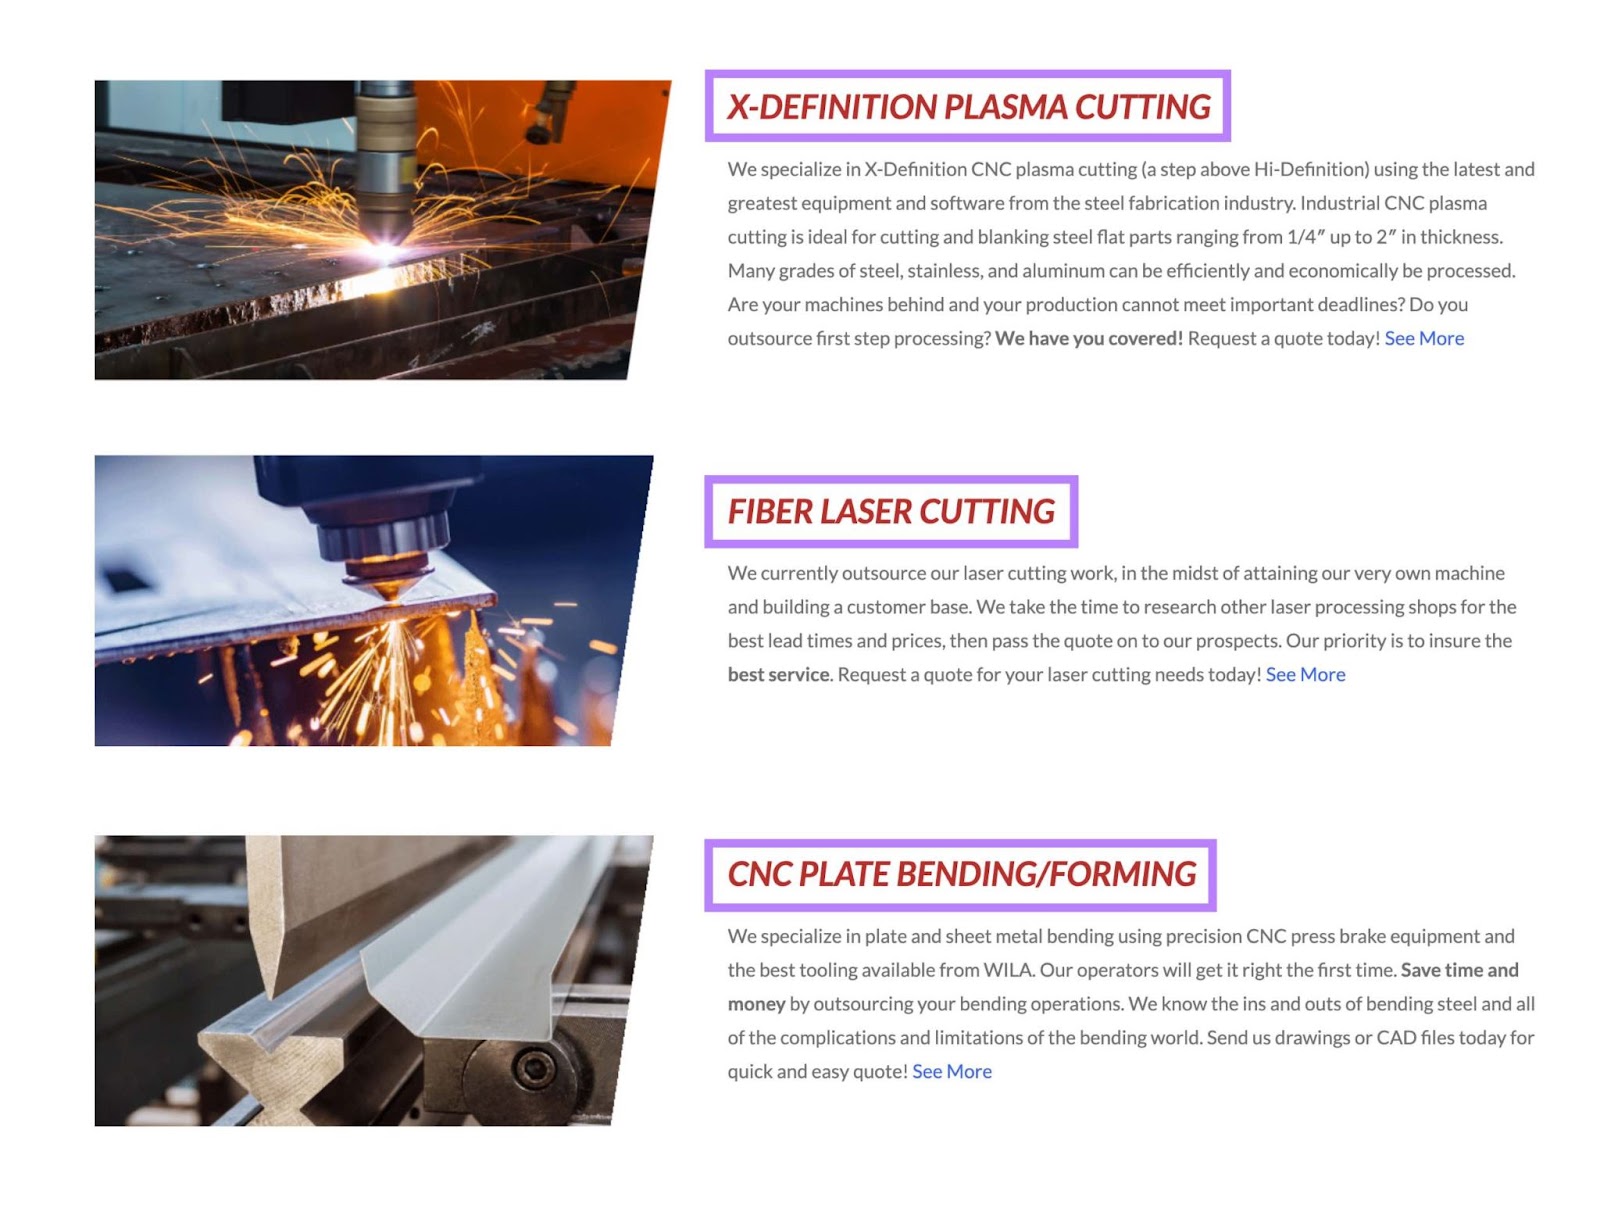 Manufacturing and fabrication shop Plasma Cutting Services using keywords related to “plasma cutting” as H2s on its homepage.